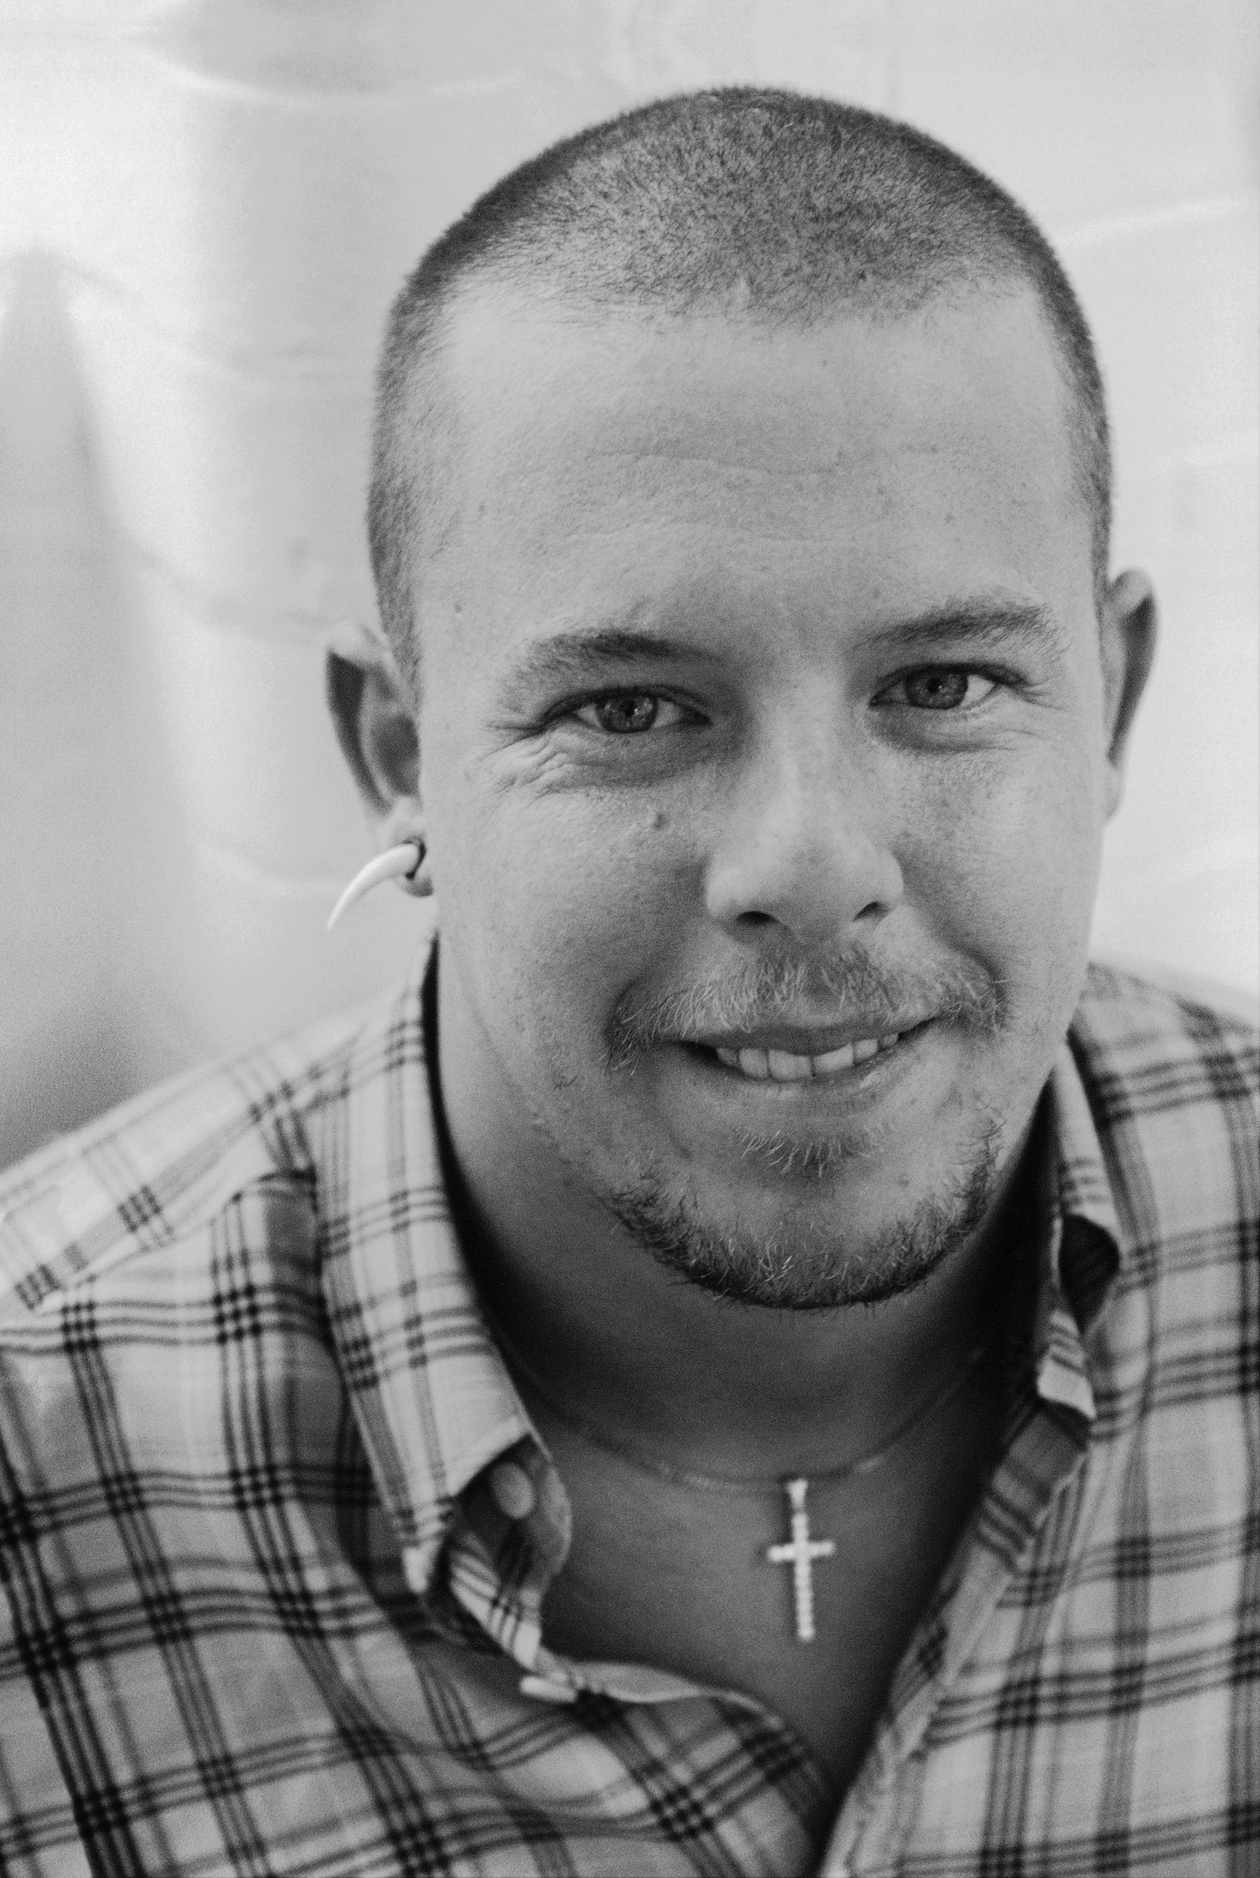 A decade after McQueen's death, his closest friends reflect on his life